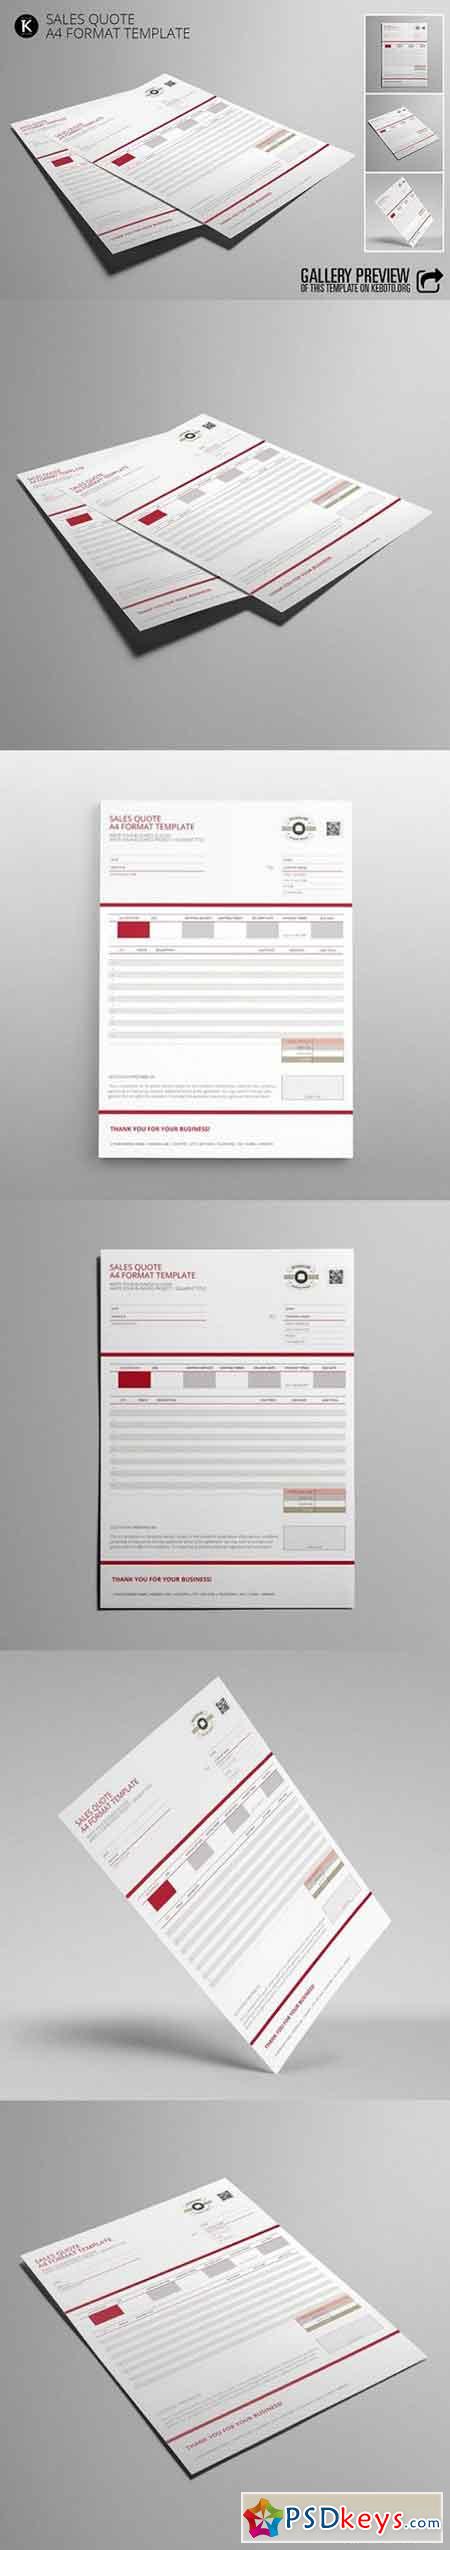 Sales Quote A4 Format Template 1383734